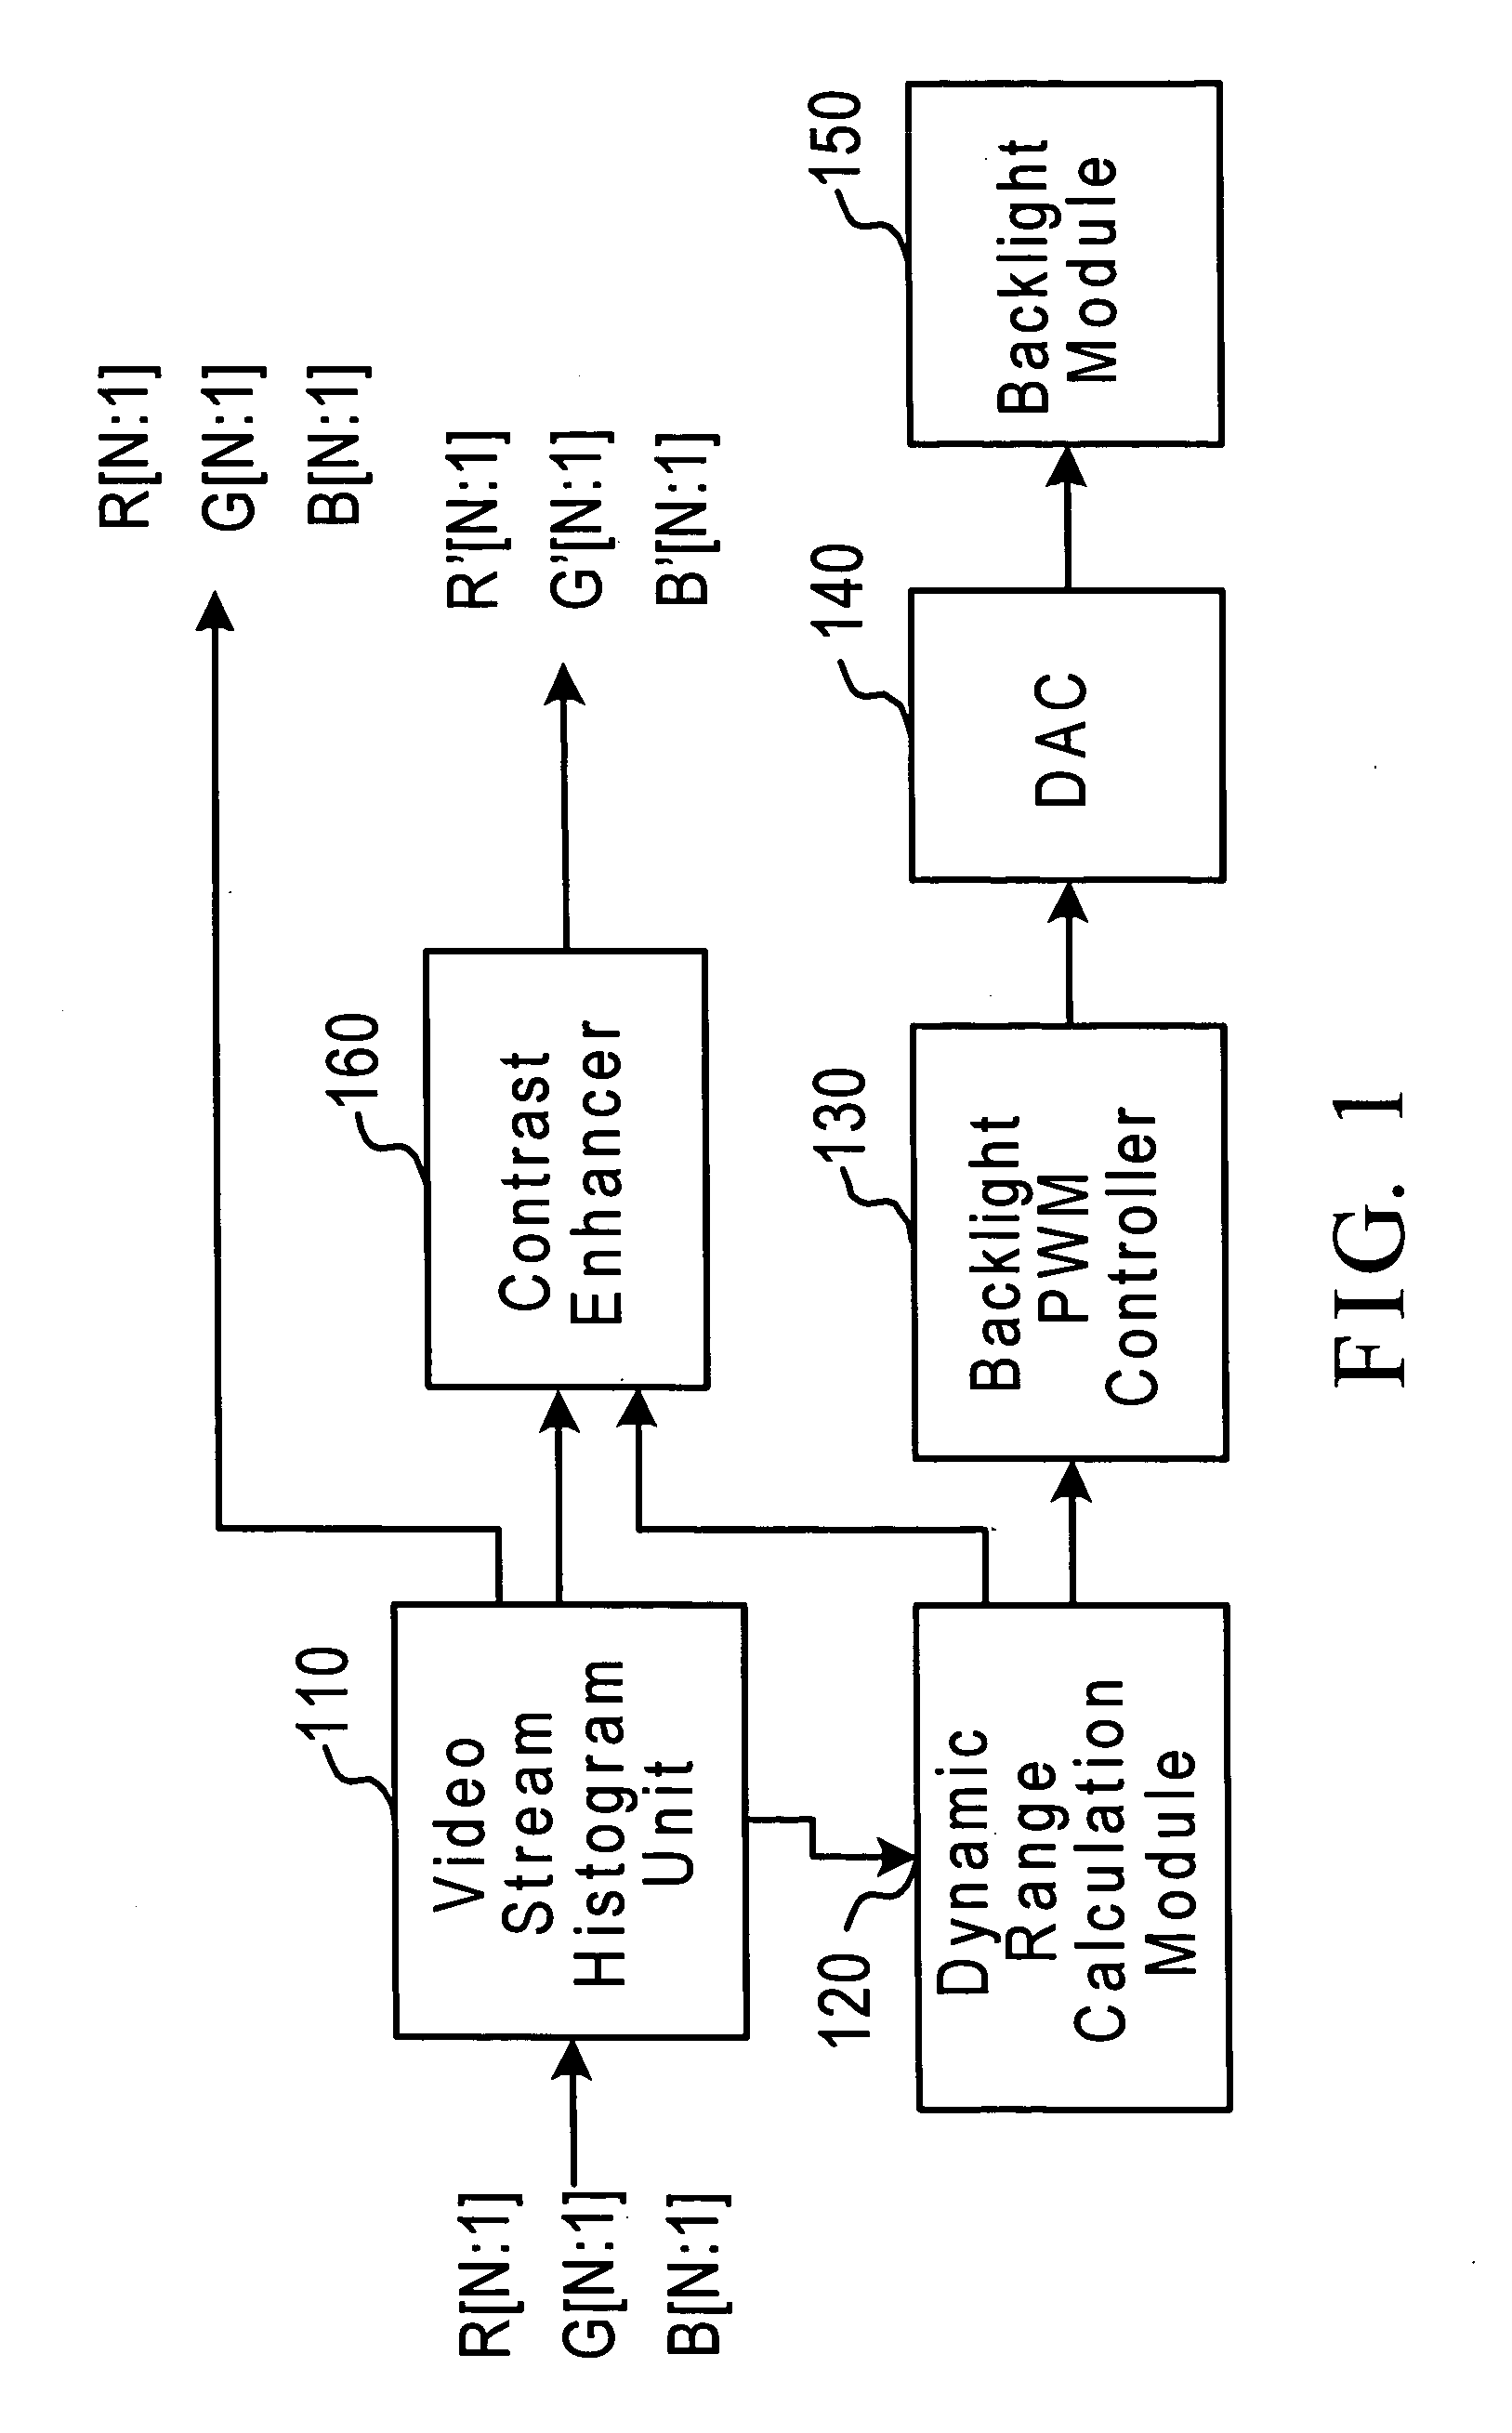 Brightness control method and device for a display